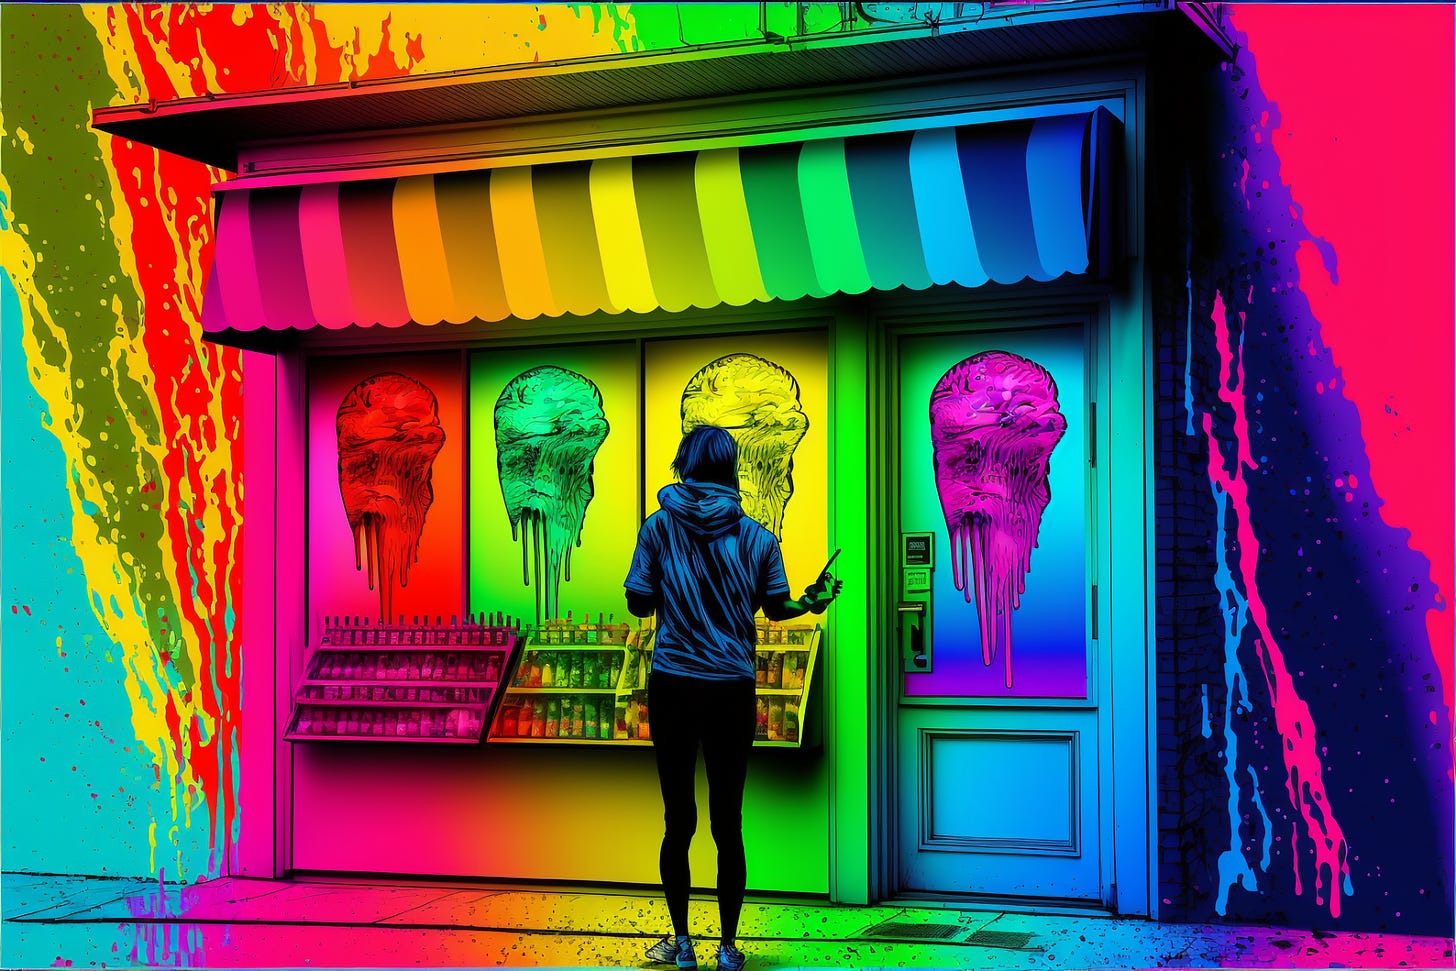 A colorful image of a person standing in front of a digital storefront